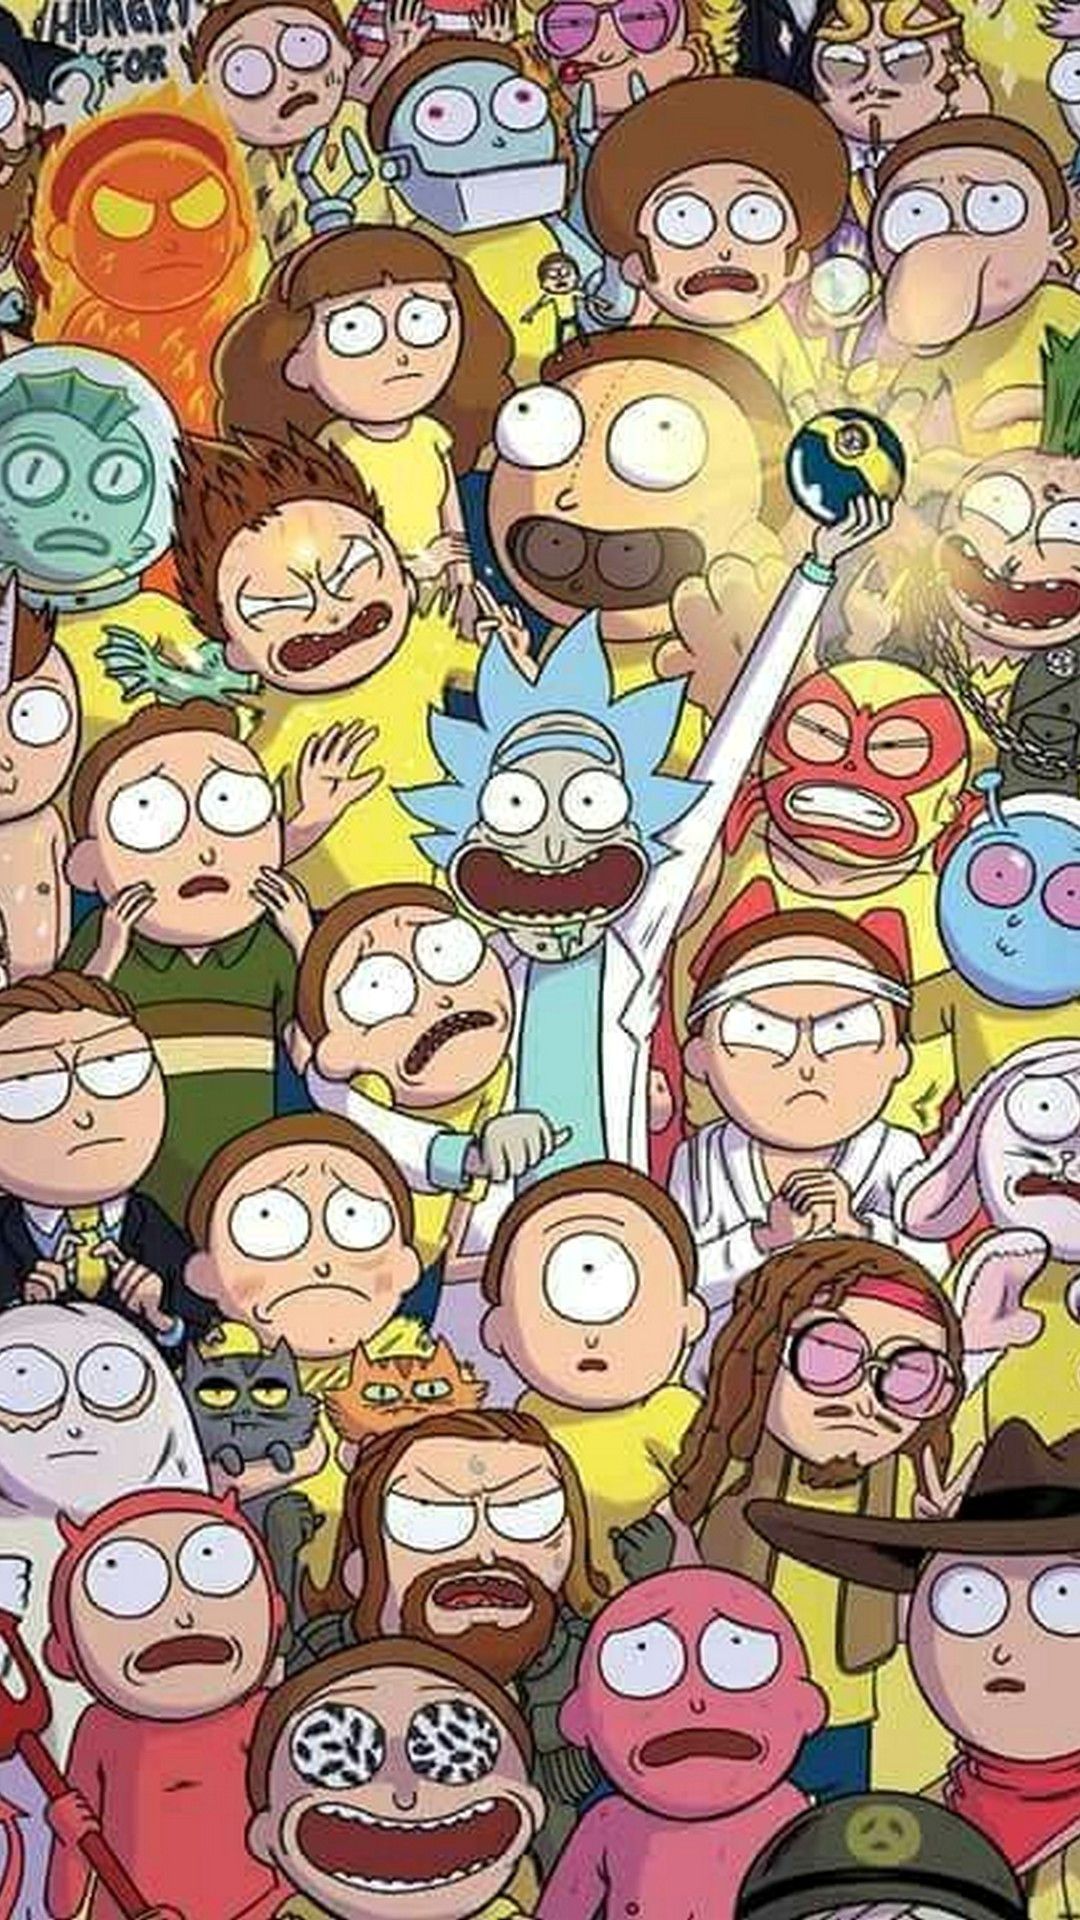 Aesthetic Rick And Morty Wallpaper Mobile. Rick and morty